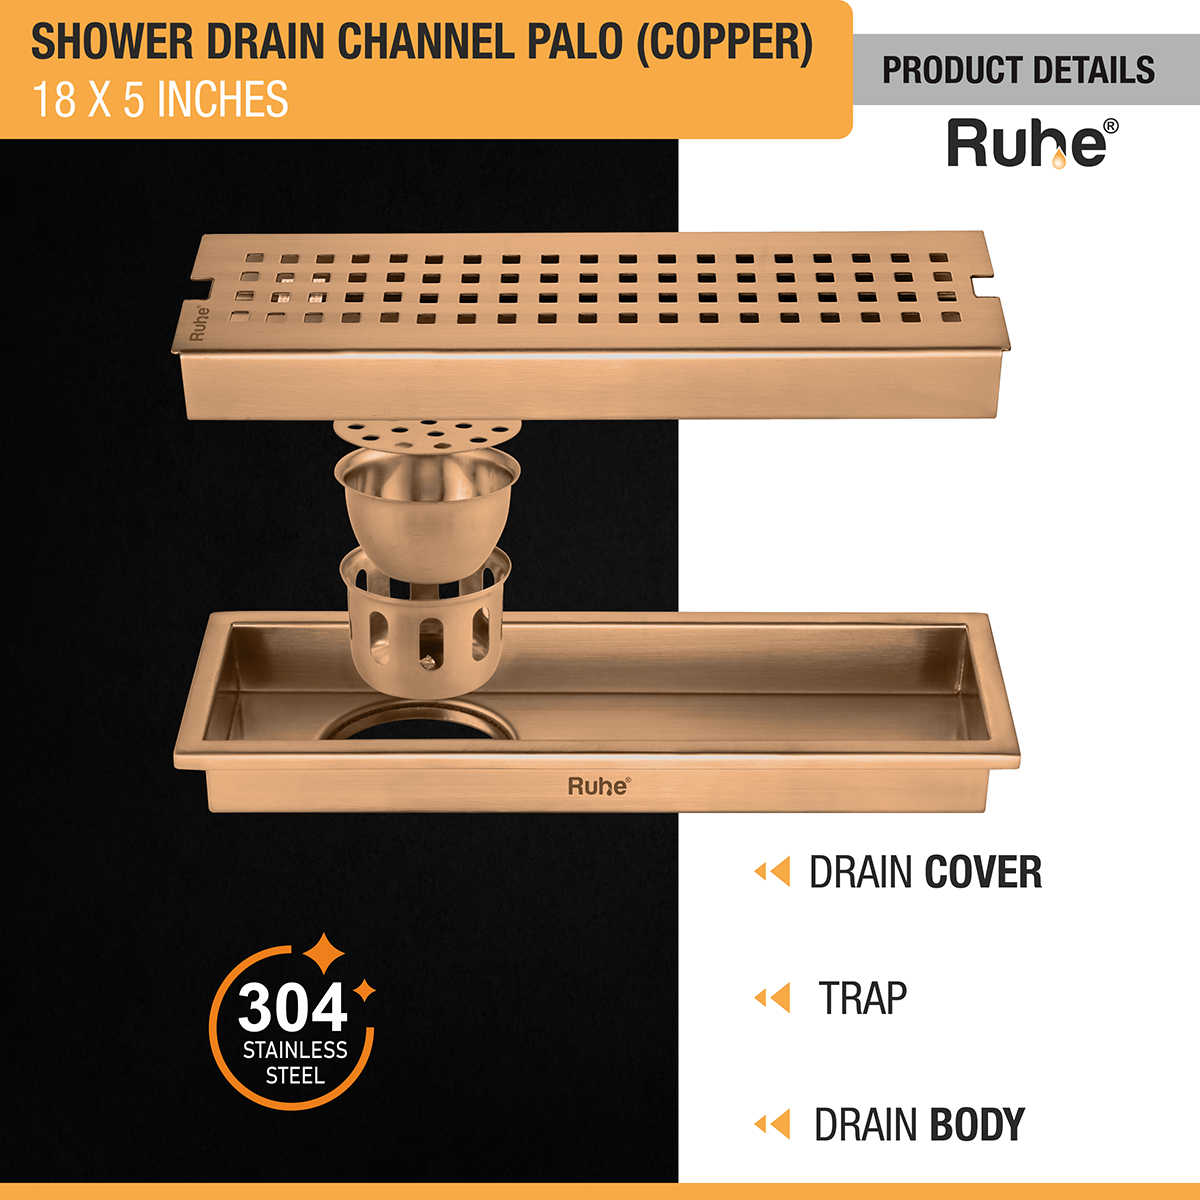 Palo Shower Drain Channel (18 x 5 Inches) ROSE GOLD/ANTIQUE COPPER product details